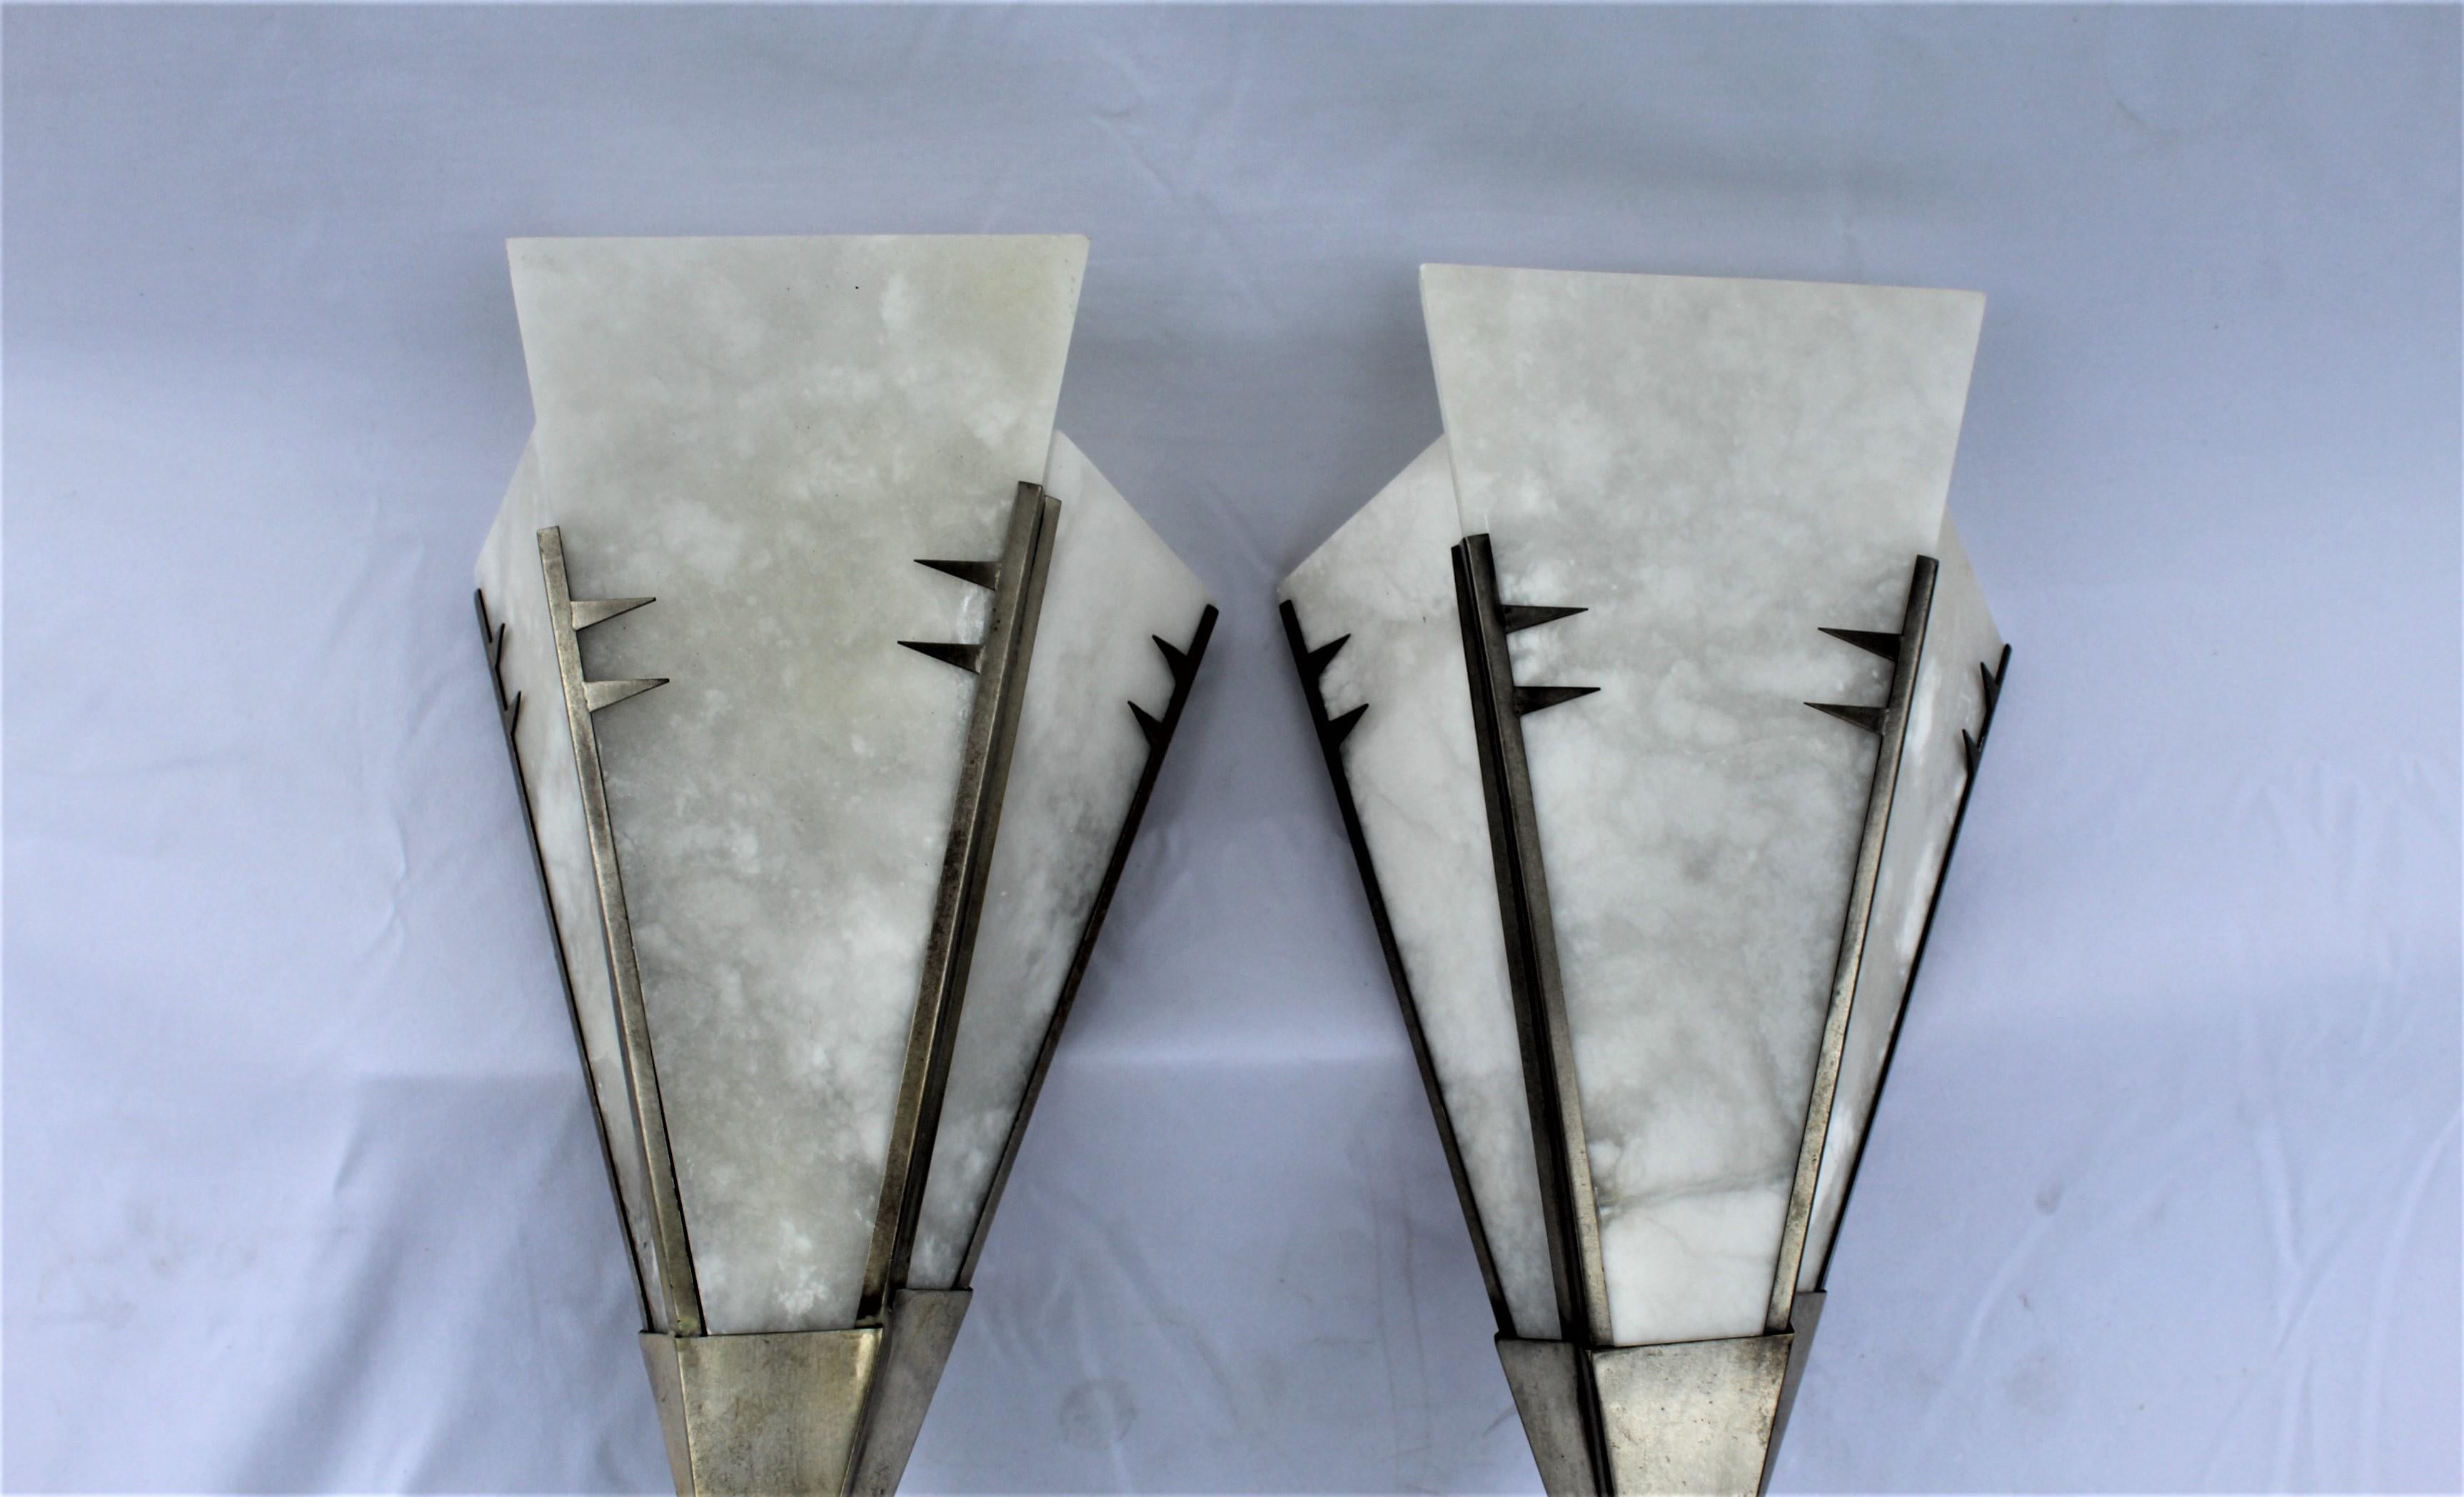 Large fan shape Alabaster sconces. Custom made with lost wax bronze frame and brass back plates. Finished in Hi Polished Nickel finish. Designed by Andre Dominic! Single candelabra. Light up very nice. 25